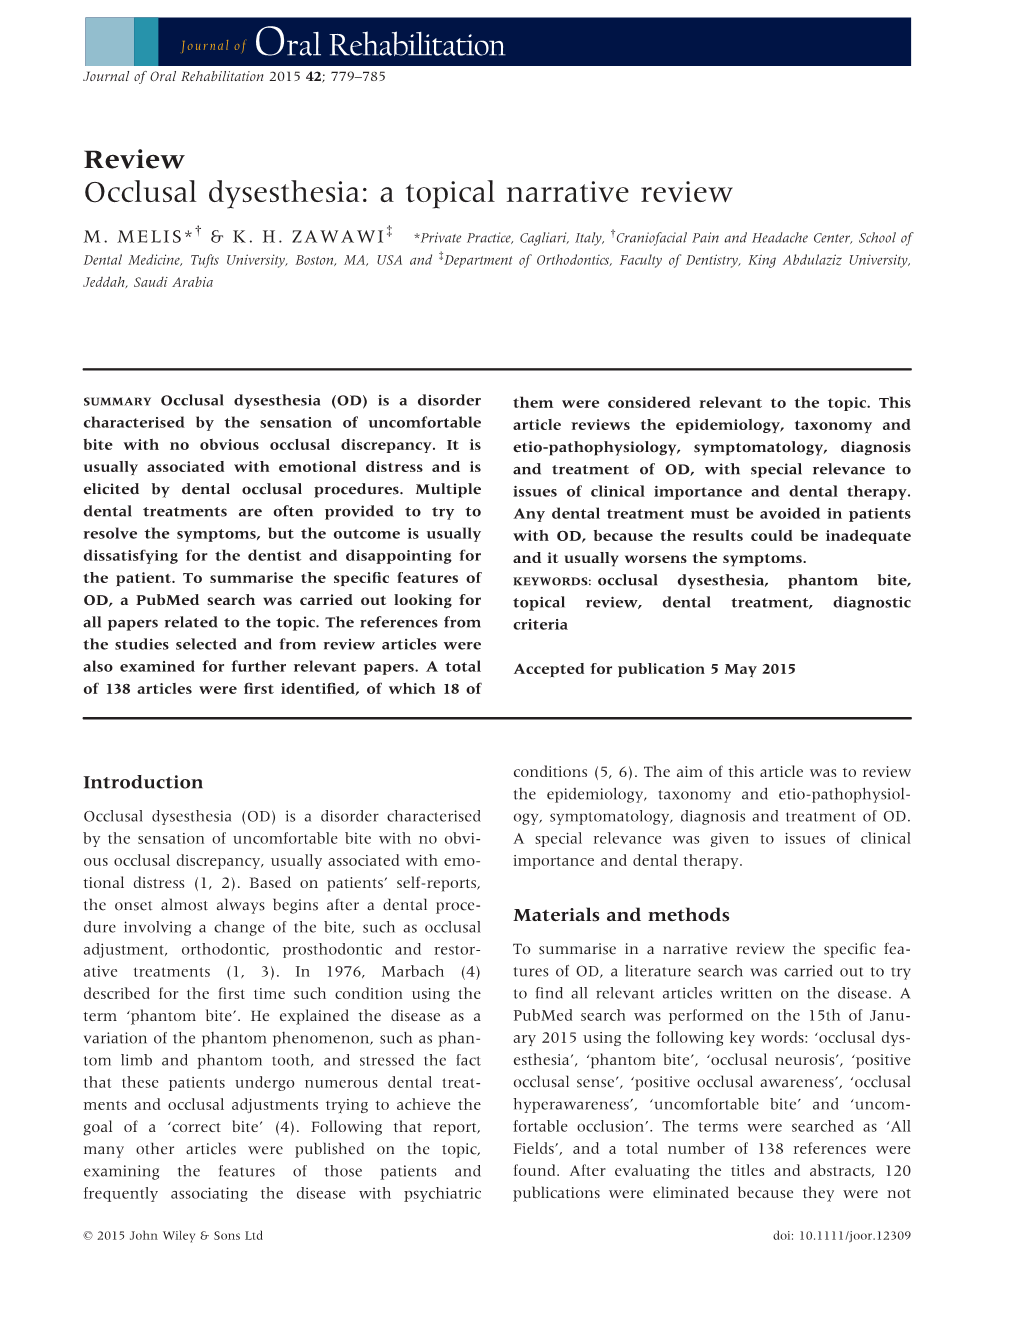 Occlusal Dysesthesia: a Topical Narrative Review